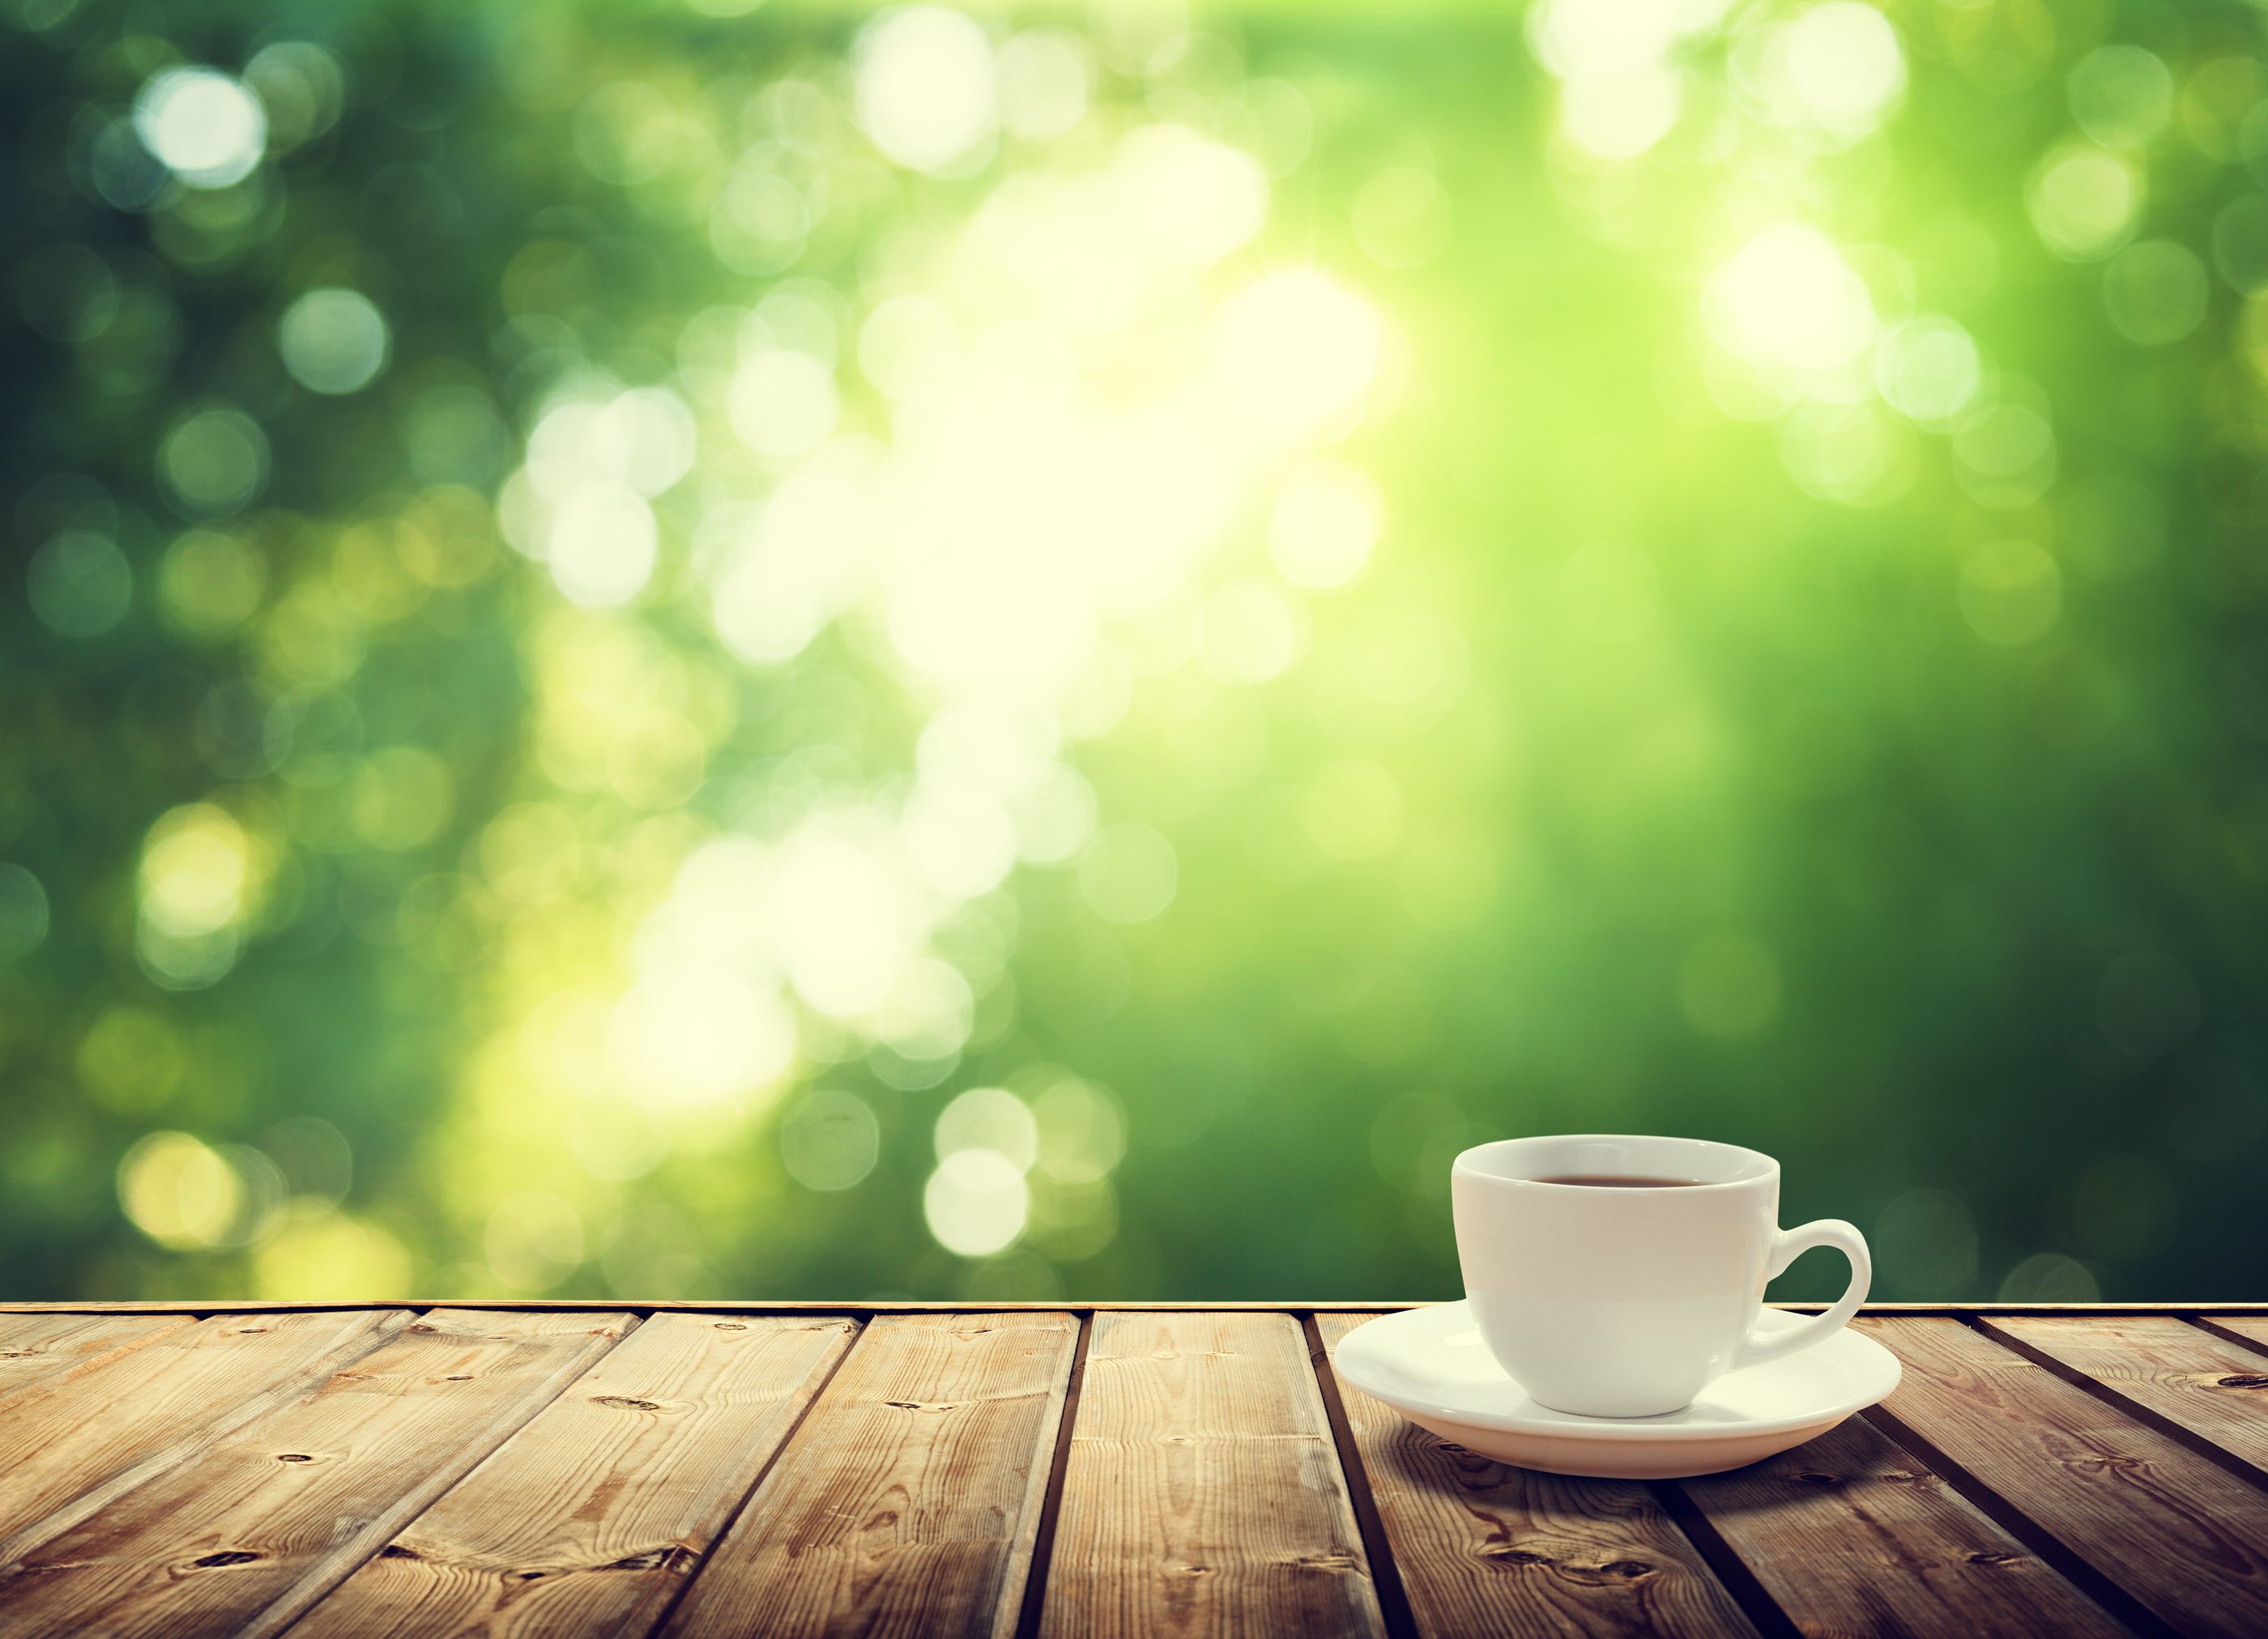 Green Coffee With Green Background Wallpaper Download